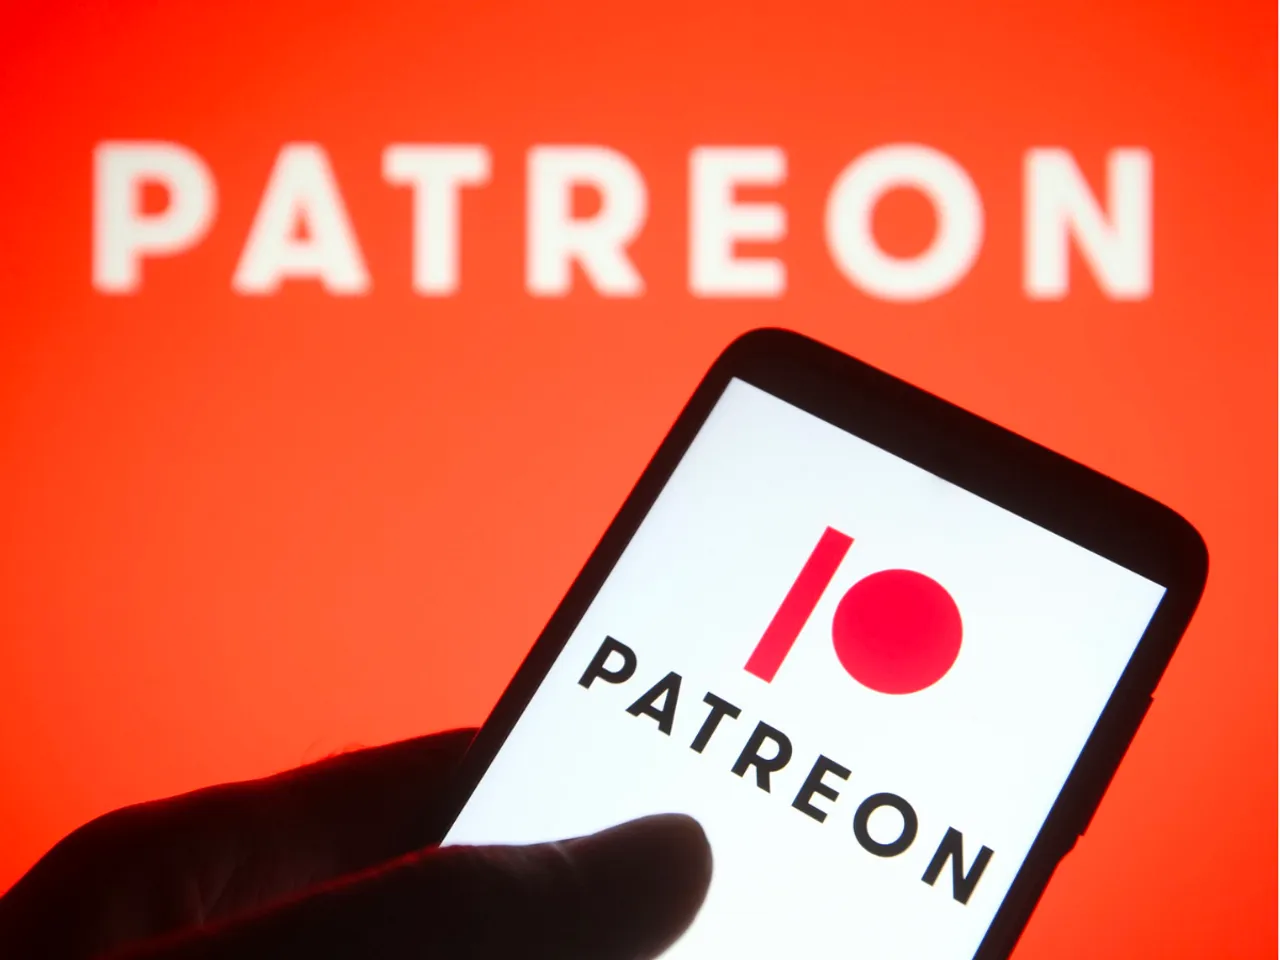 What is Patreon and how does it work?